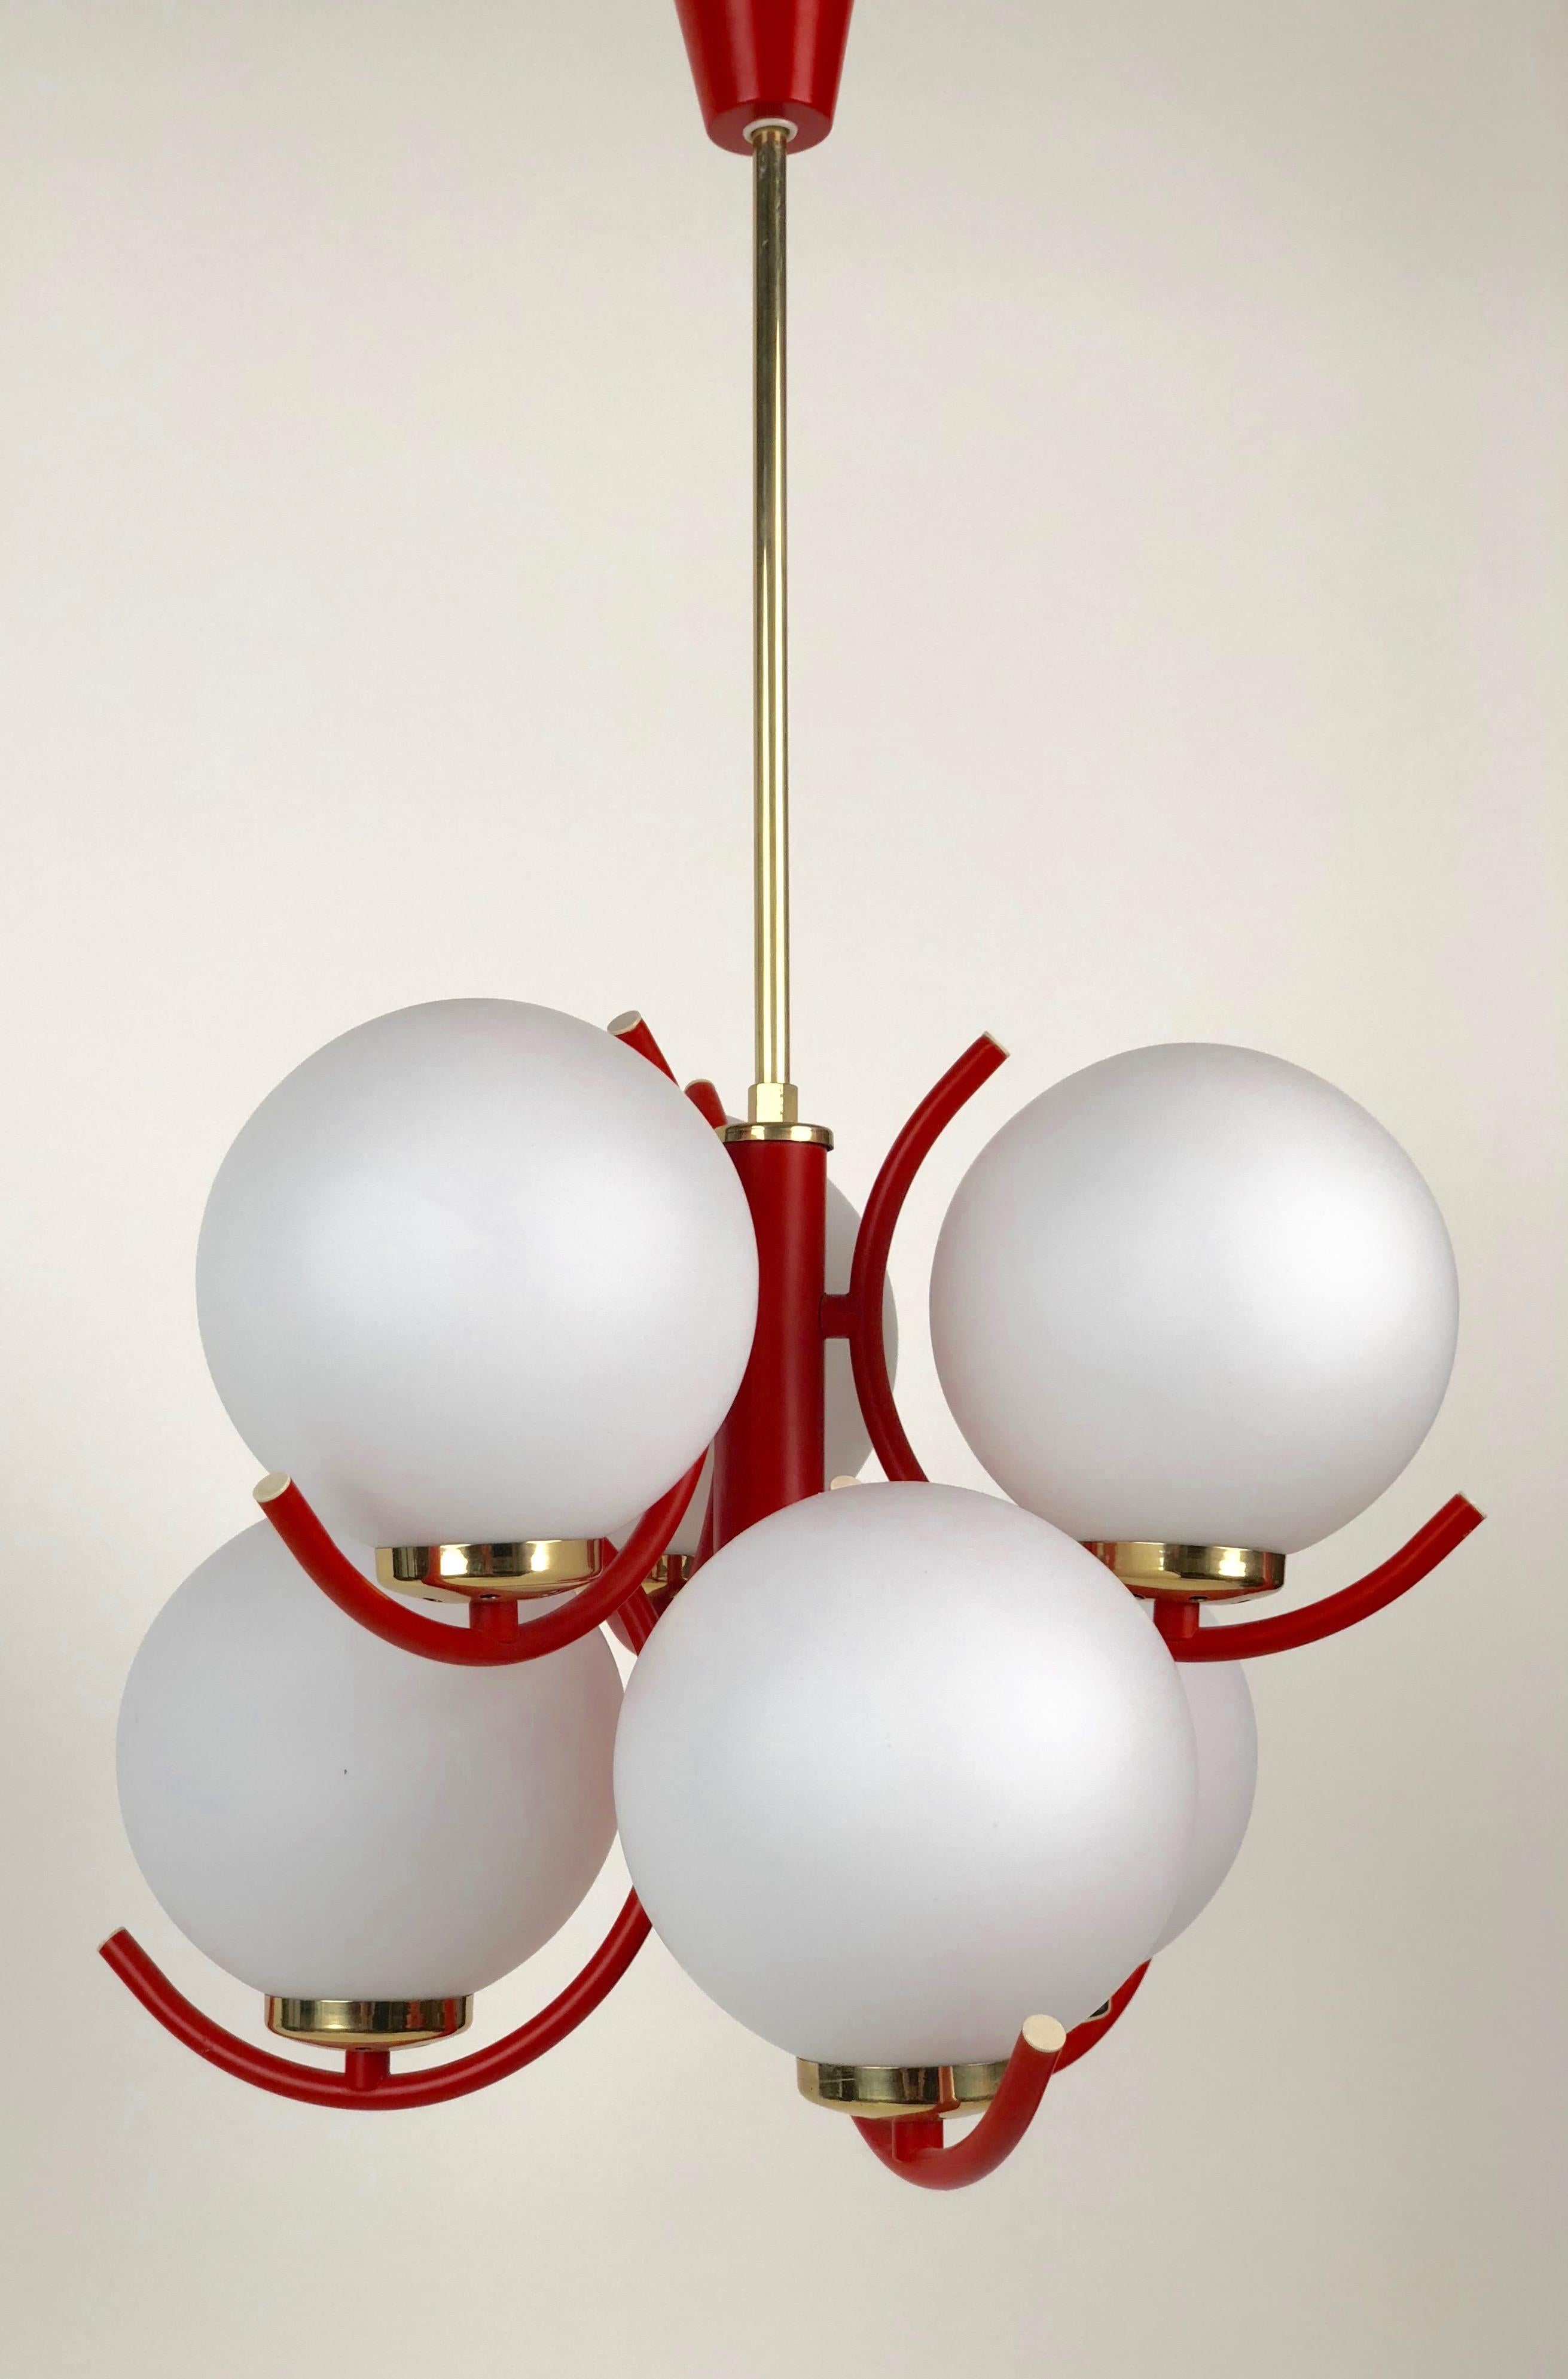 A beautiful pendant lamp in coral color with brass trim. The 6 glass globes are mat opaline glass.